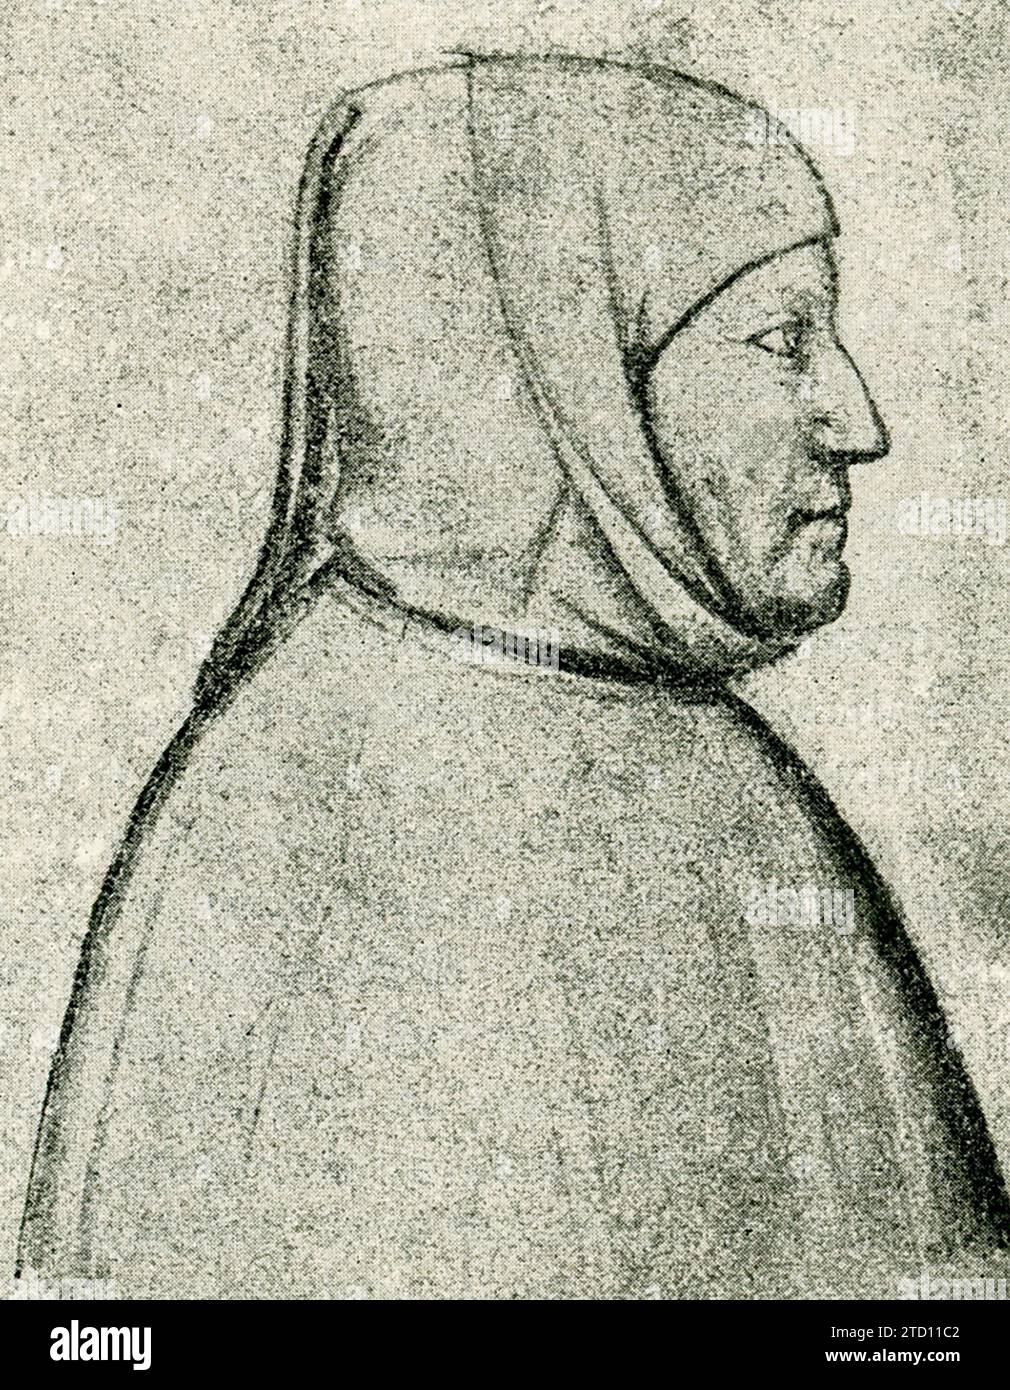 This illustration of Petraca (Petrarch) is taken from an old engraving. Francesco Petrarca (1304-1374), commonly anglicized as Petrarch, was a scholar and poet of the early Italian Renaissance, and one of the earliest humanists. Petrarch's rediscovery of Cicero's letters is often credited with initiating the 14th-century Italian Renaissance and the founding of Renaissance humanism. Stock Photo